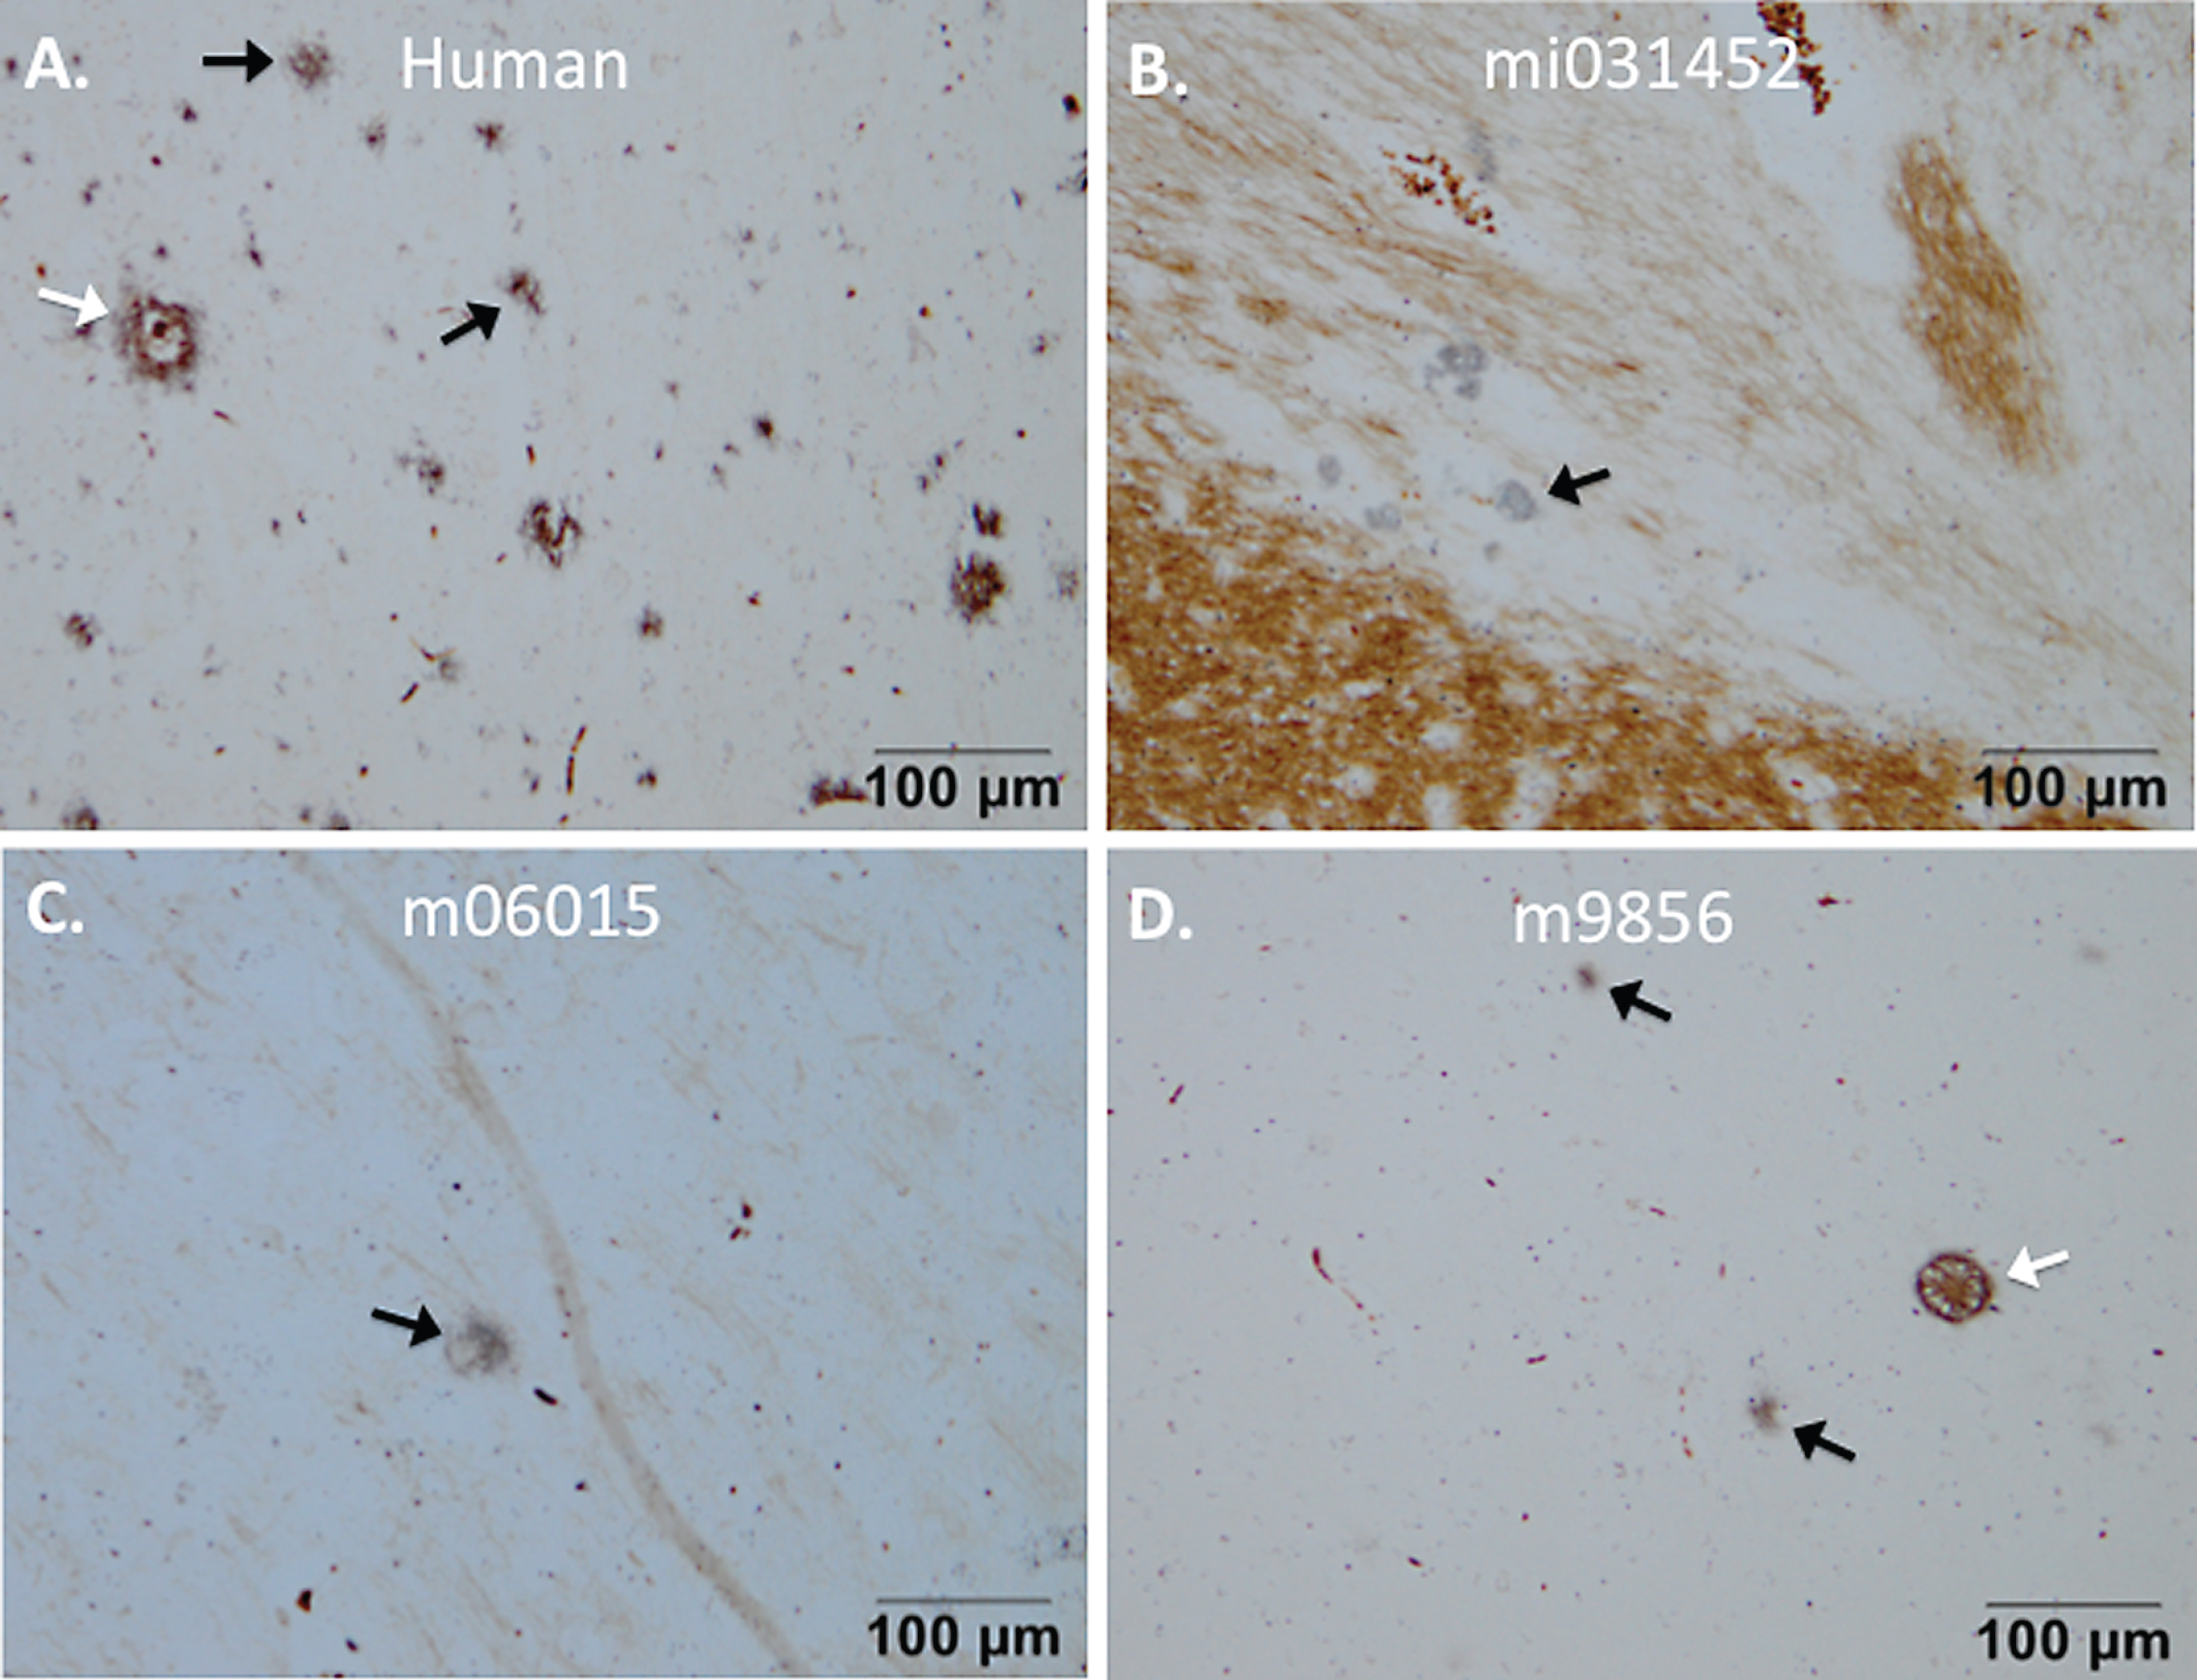 Senile plaques visualized with Campbell-Switzer staining. Senile plaque formation was present in brain material of an AD patient (A) and also natural (early) amyloidosis was present in the common marmoset (B) that died at an age of six due to wasting syndrome (mi031452). Experimental monkeys m06015 and m9856 that were injected with the Aβ combined with LPS also demonstrated amyloidopathy (C, D). The plaques in monkey m06015 were solely found in the right hemisphere. Diffuse plaques are indicated with a black arrow and dense-core plaques are indicated with a white arrow.